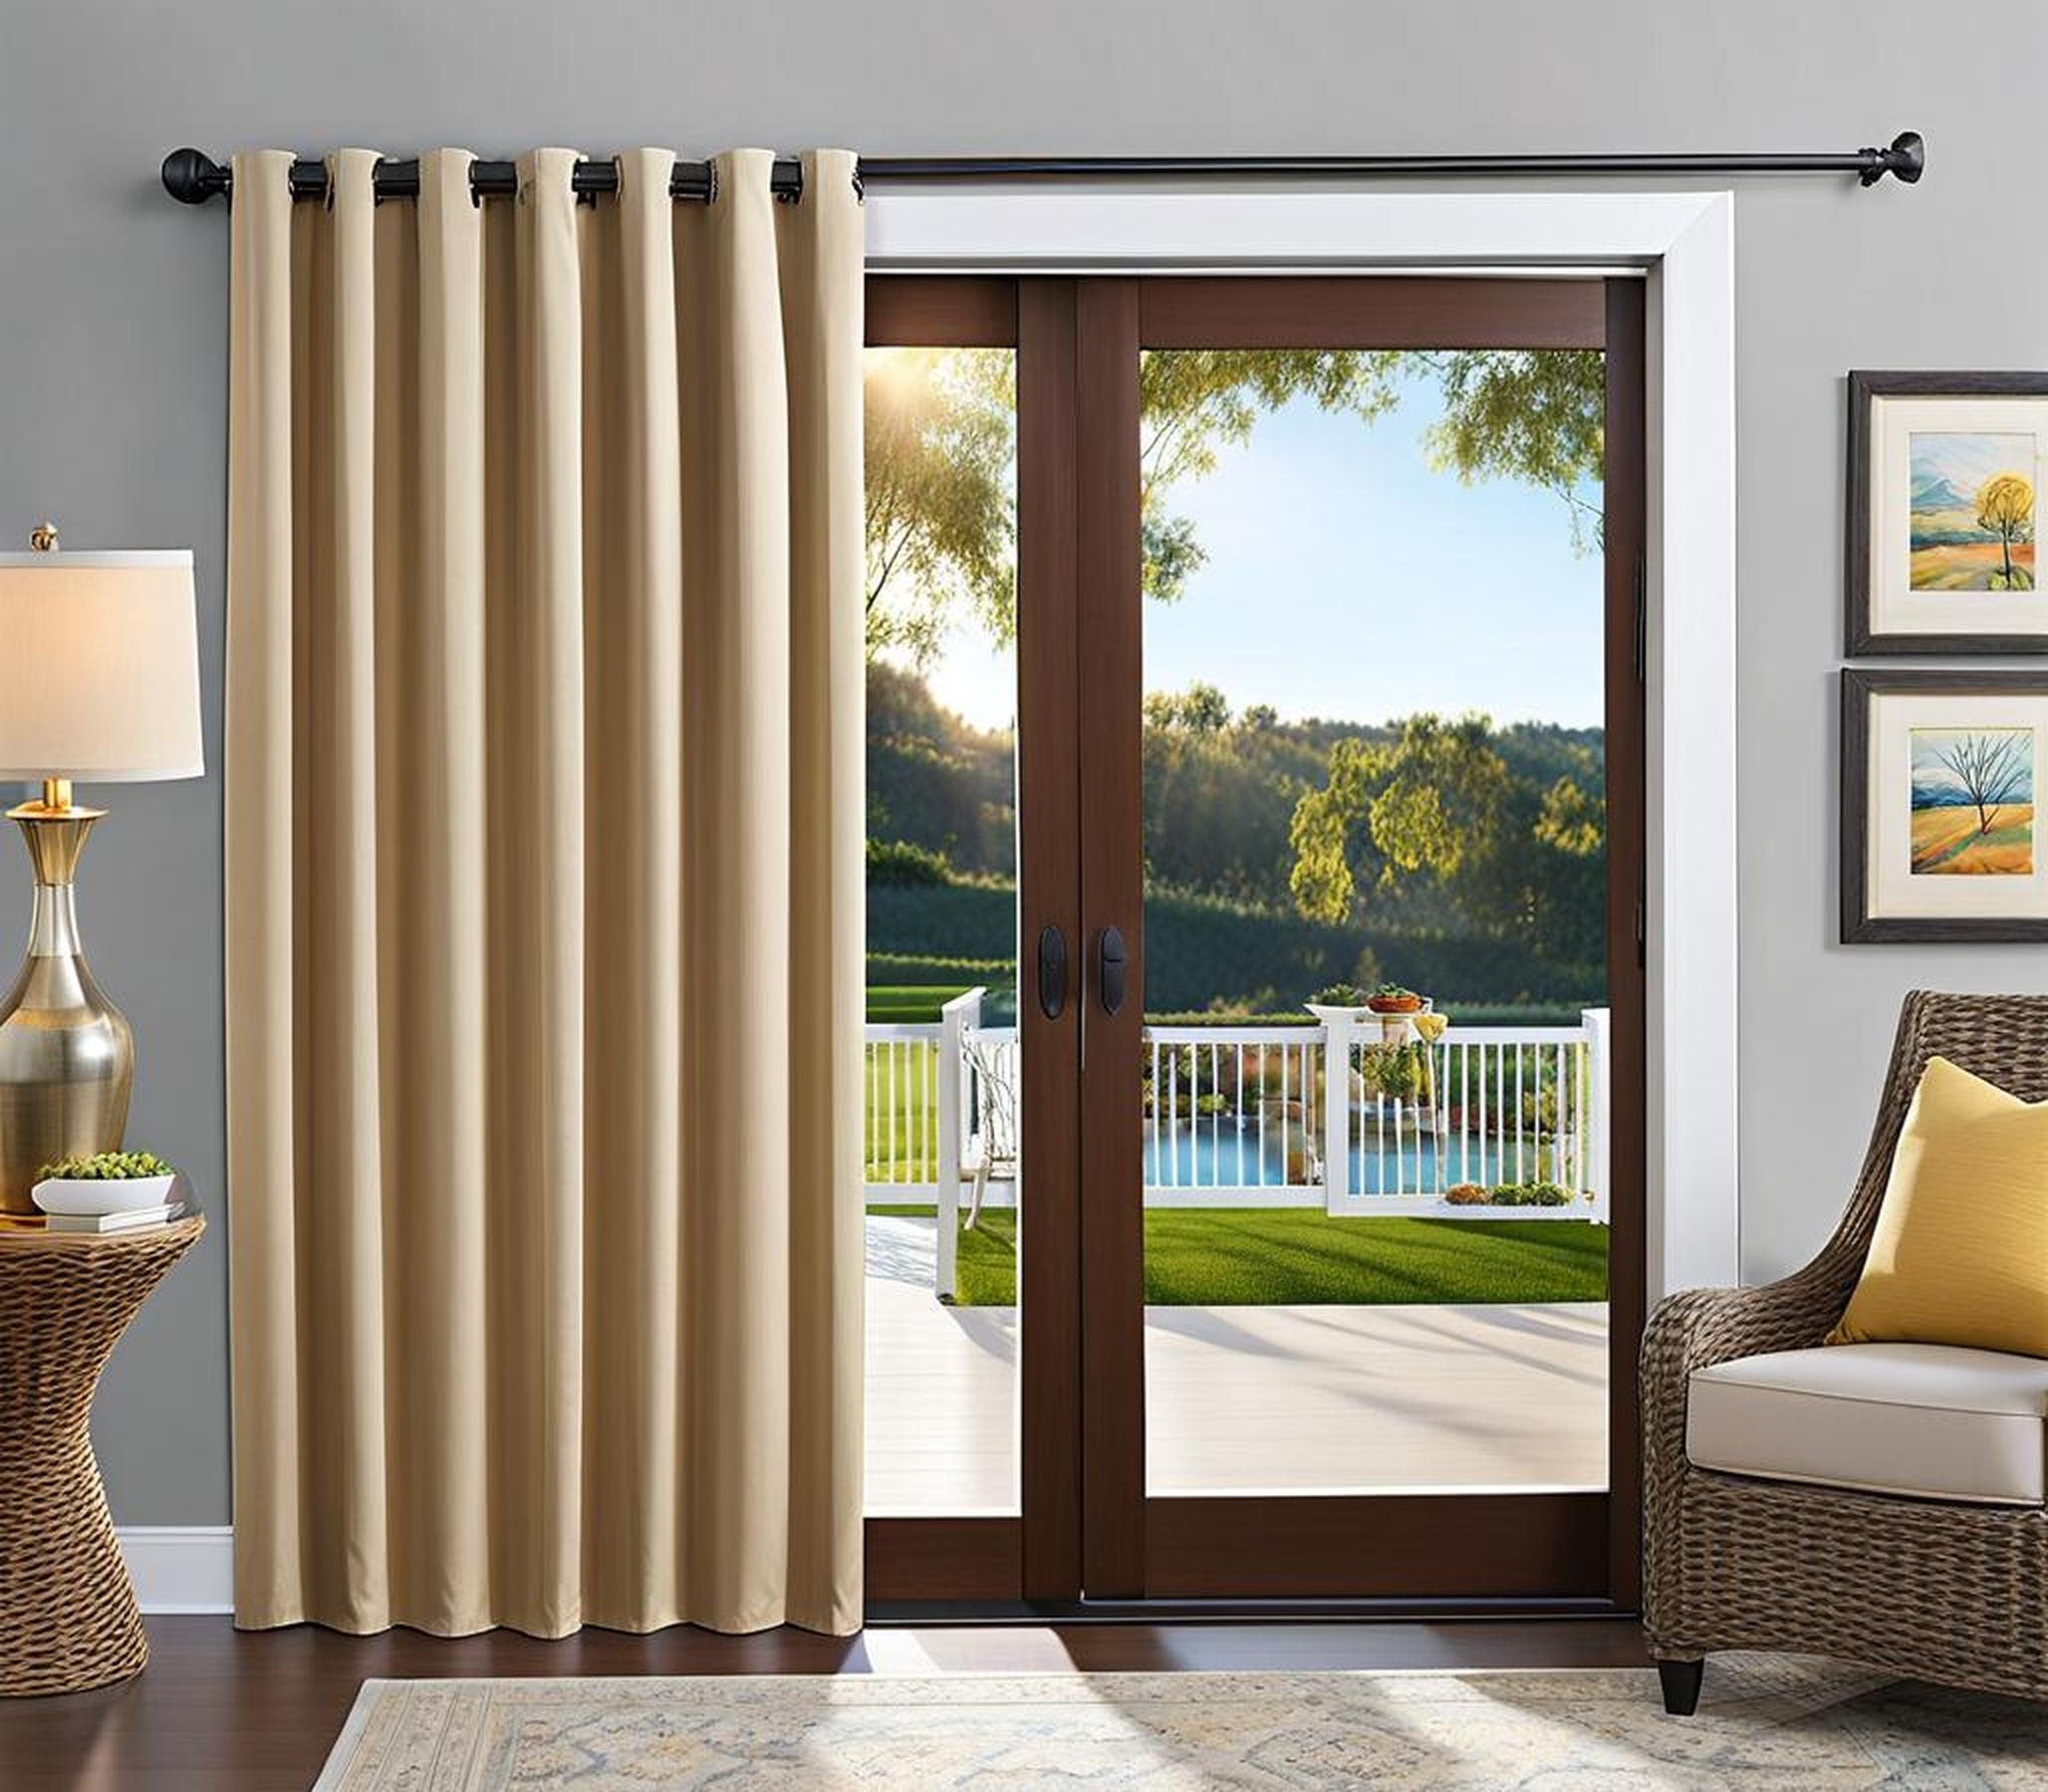 Insulate Your Patio Door with Light-Blocking Blackout Curtains